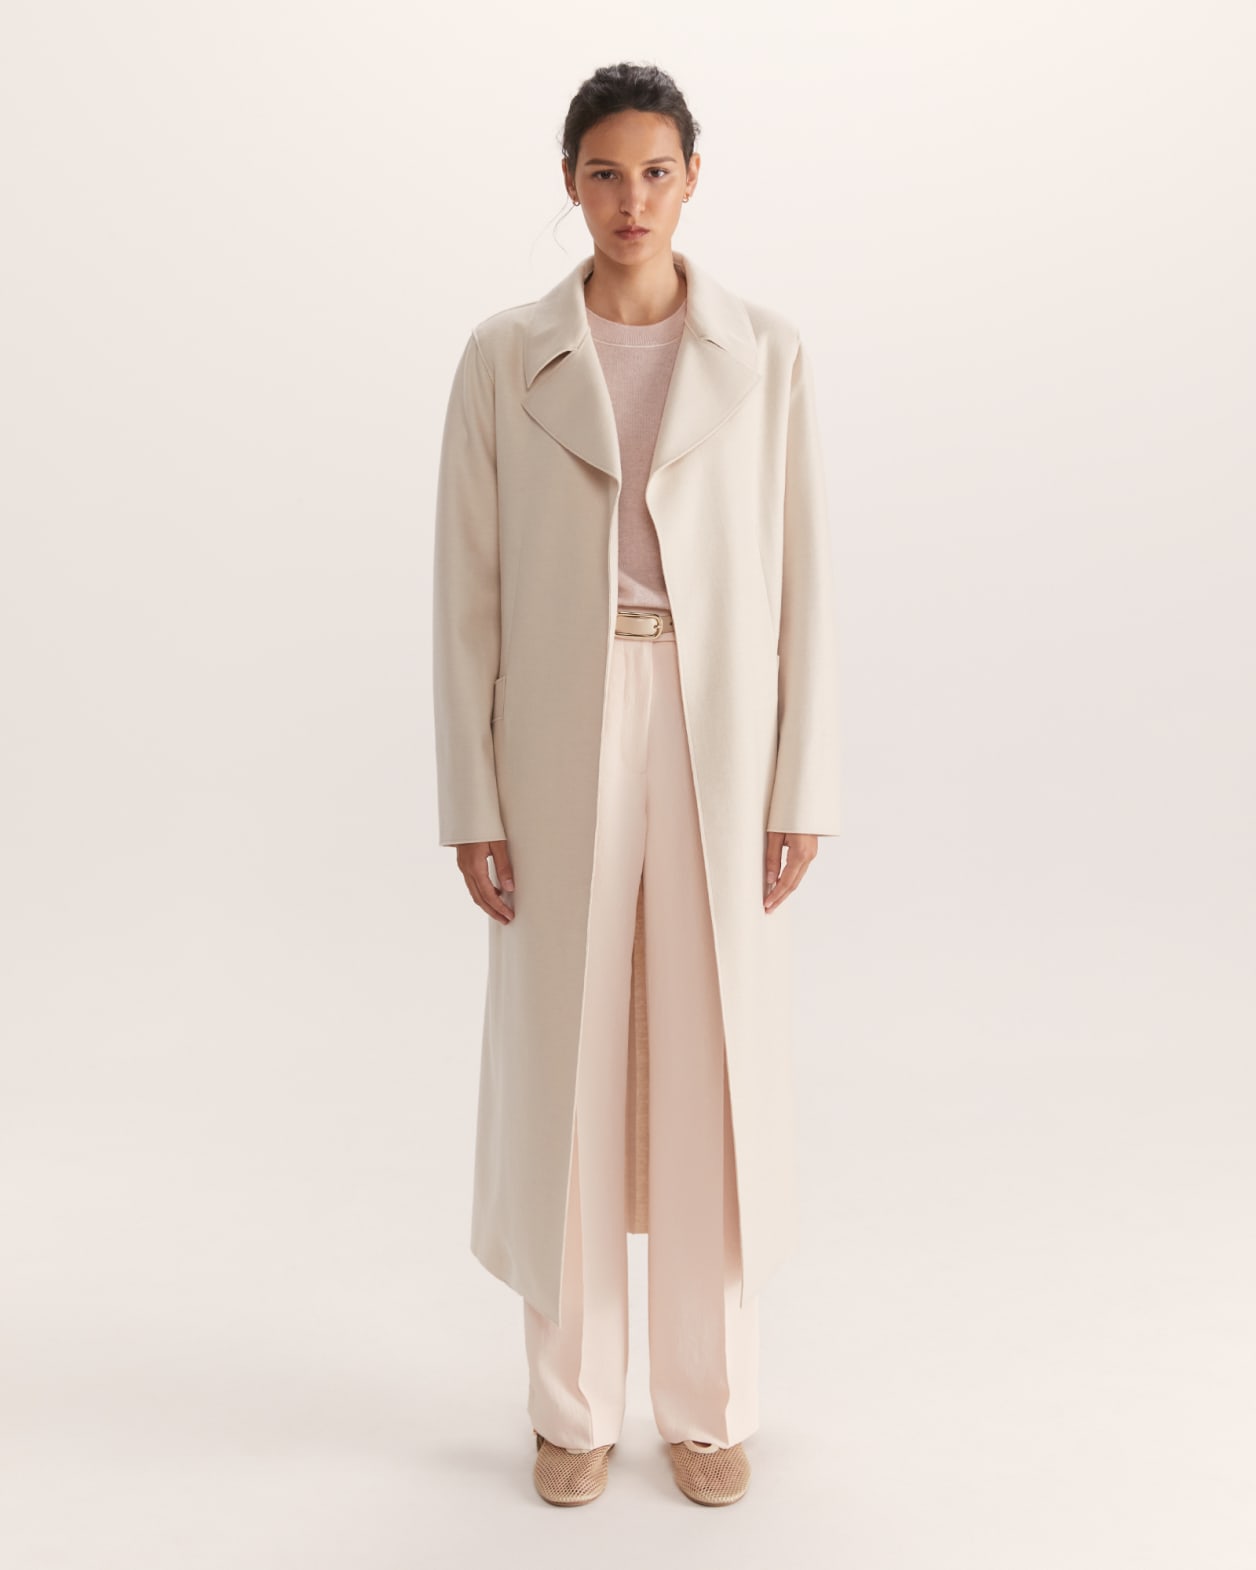 Karla Wool Relaxed Coat in SOFT STONE